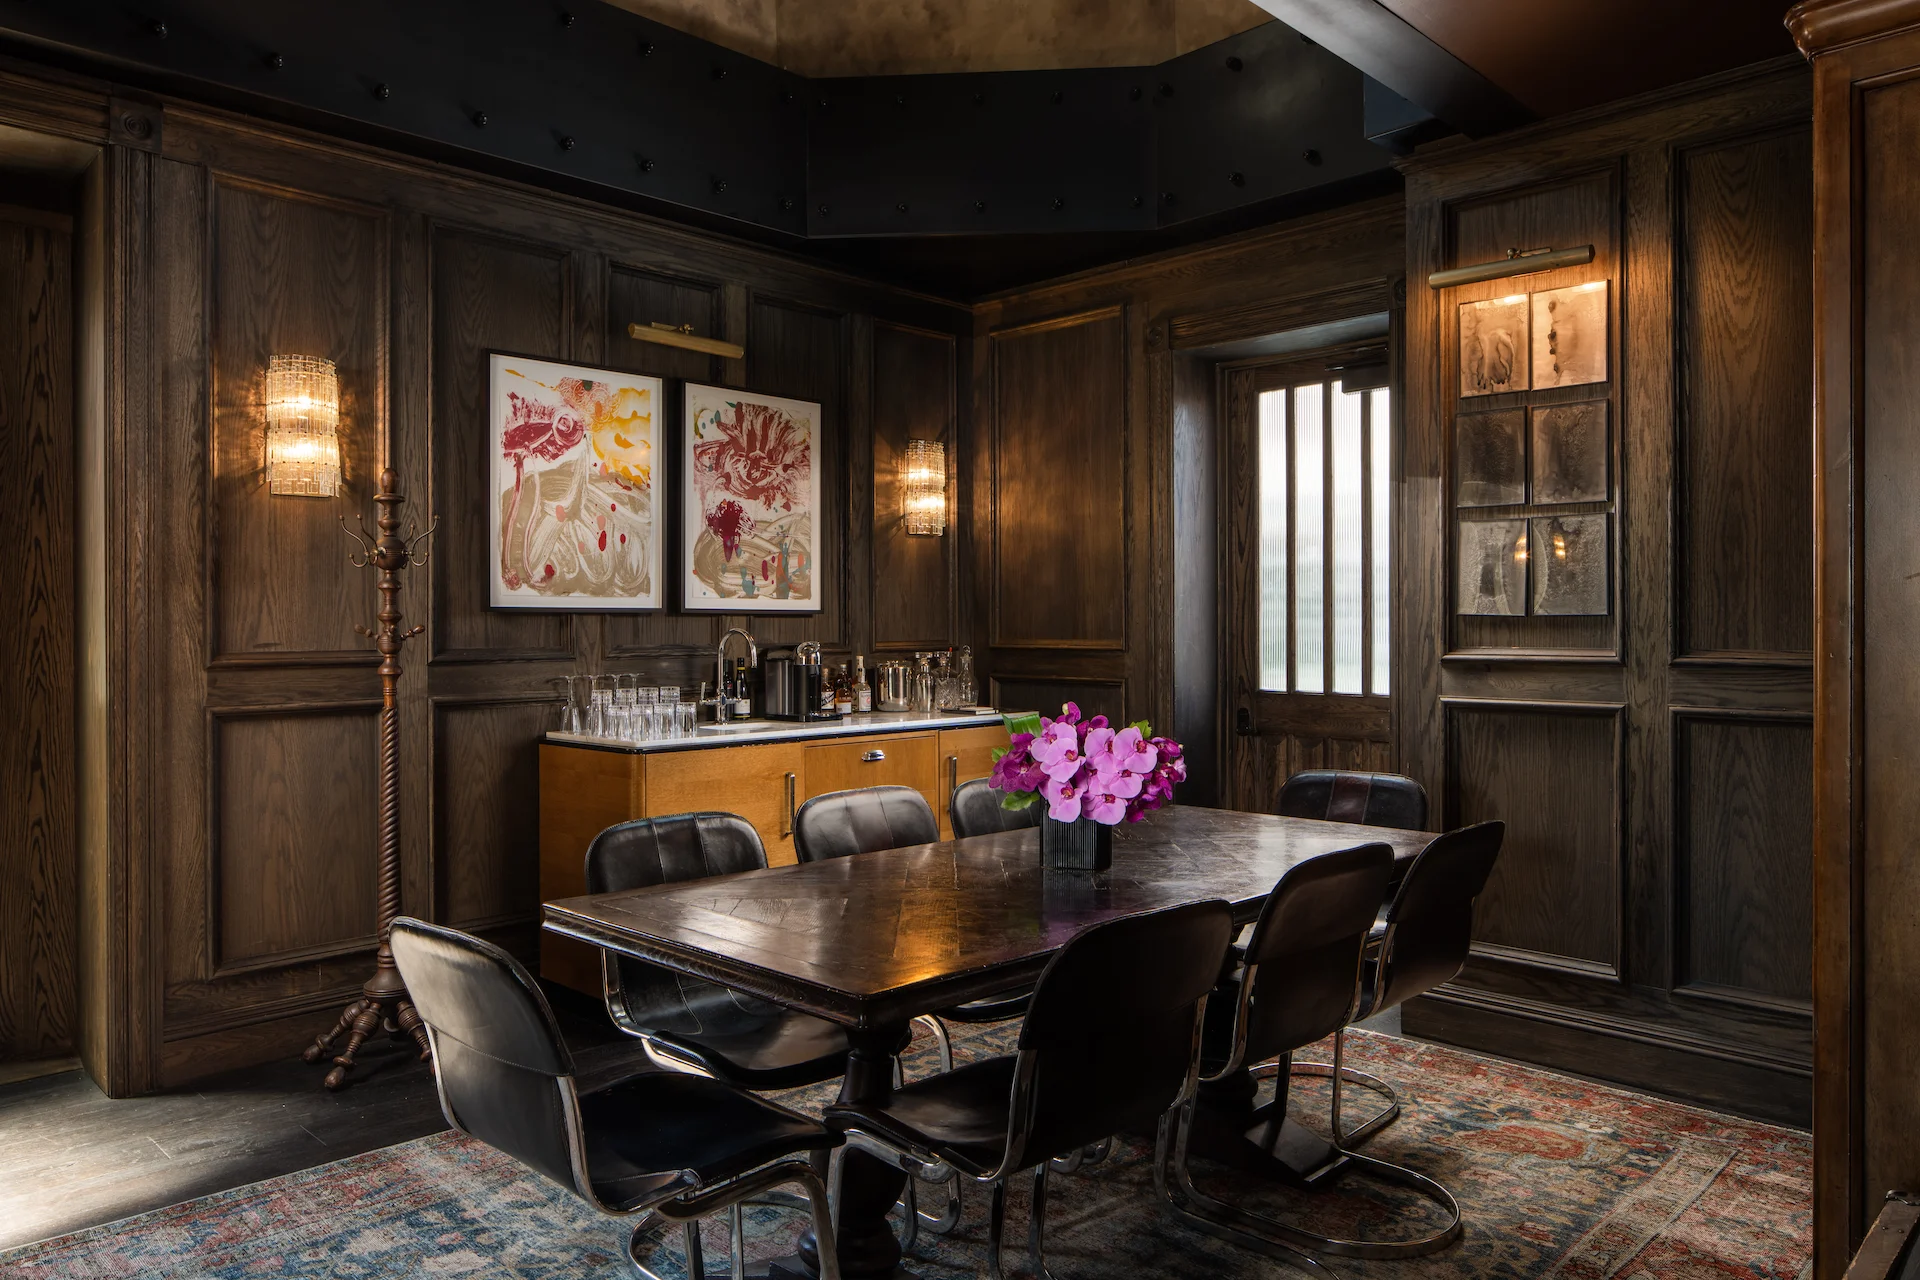 Dining table in the penthouse of The Beekman Hotel